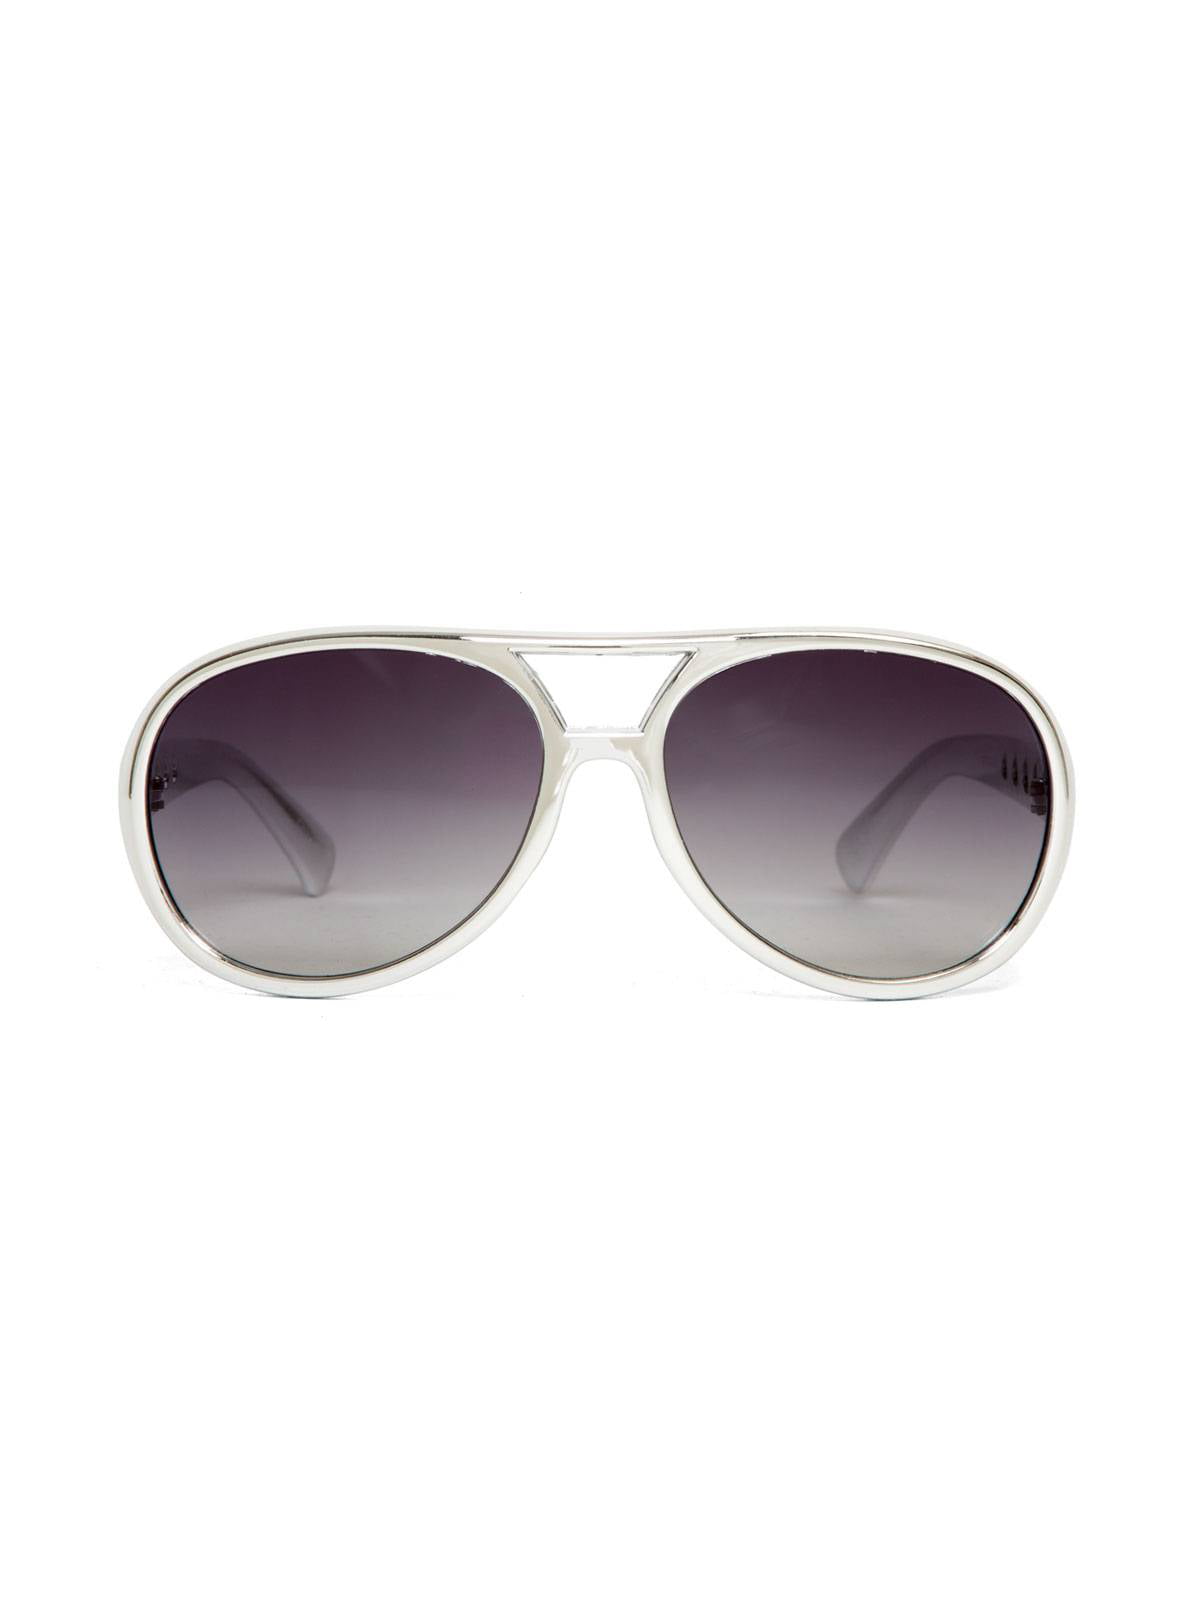 rock and roll sunglasses